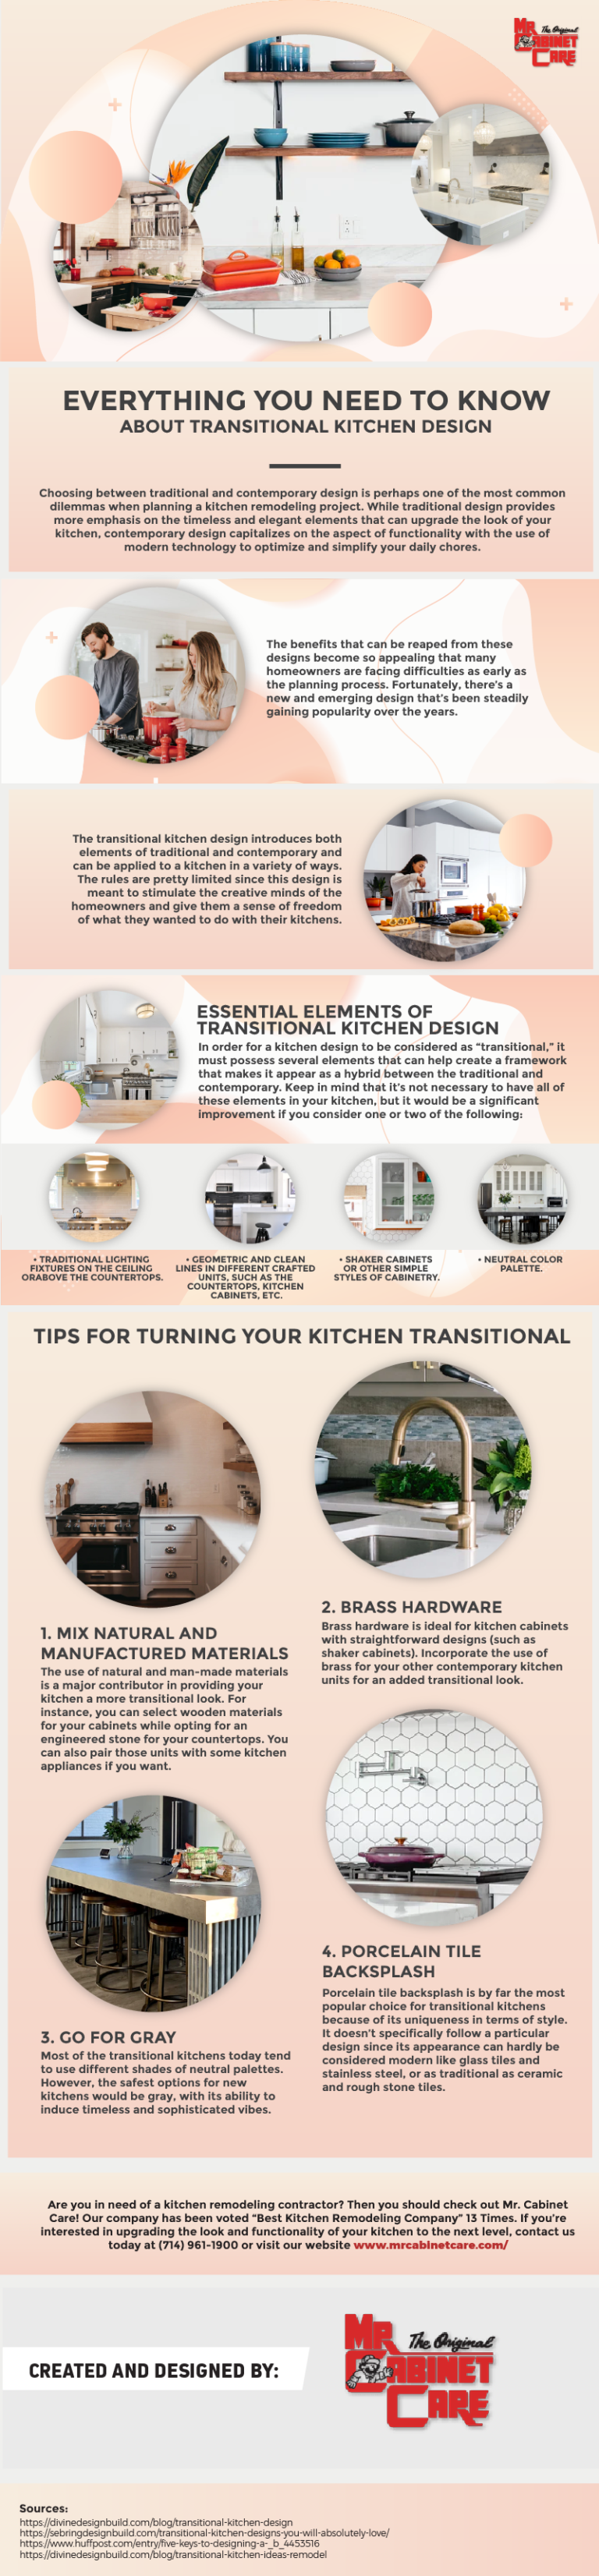 Everything You Need to Know About Transitional Kitchen Design